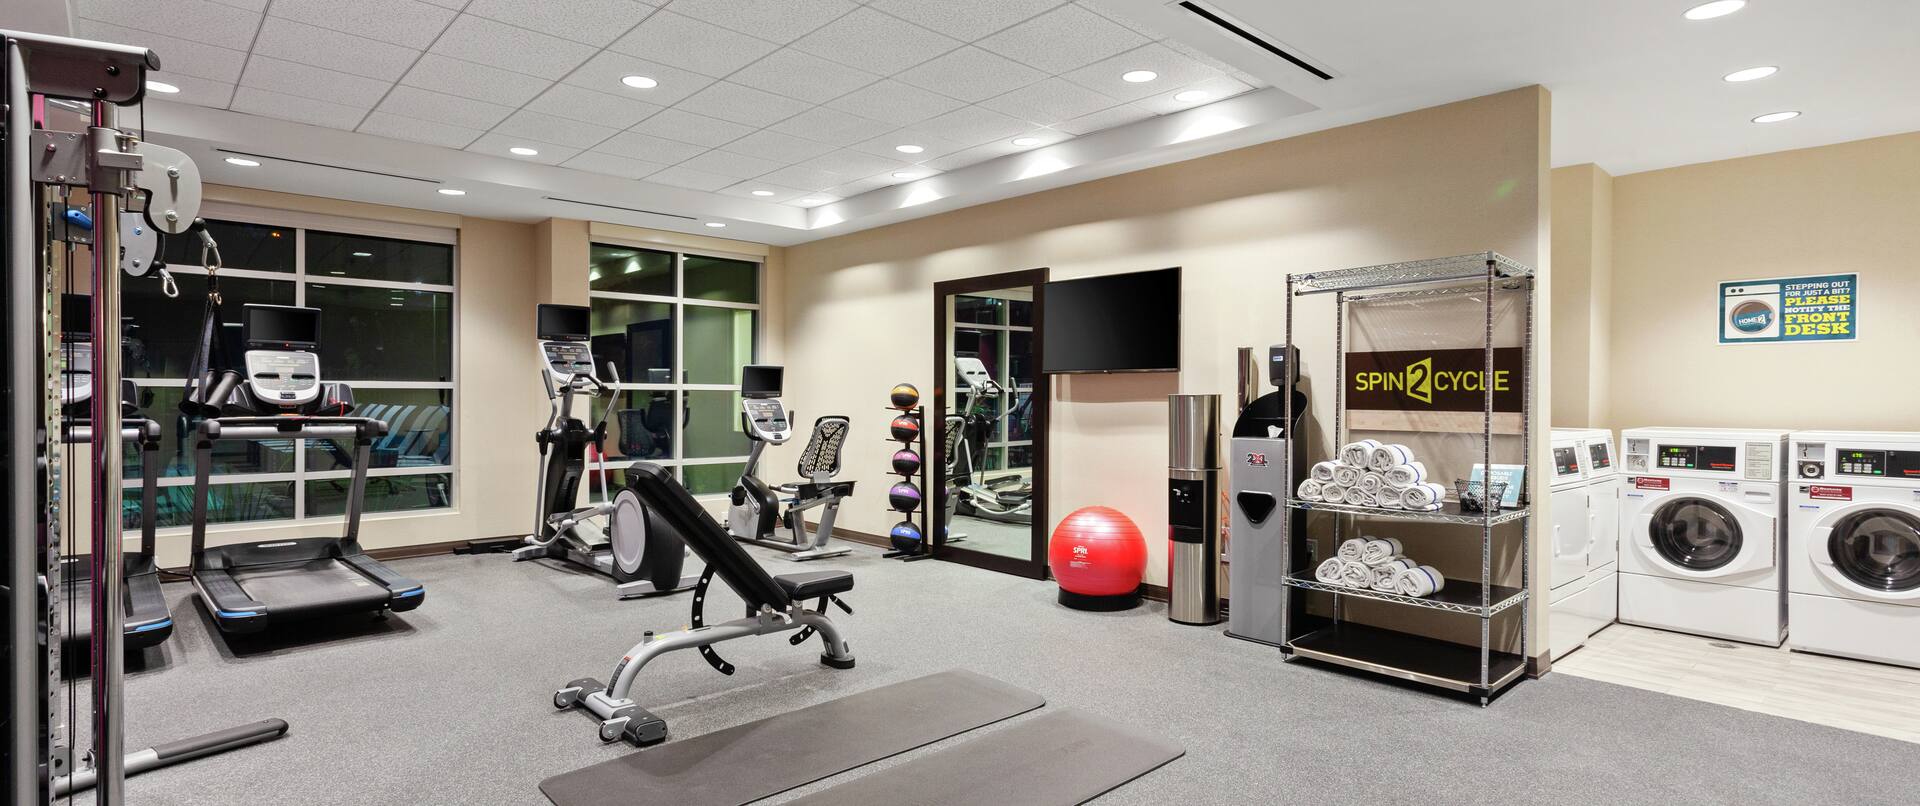 Fitness Center with Weight Bench, Treadmill and Weight Machine